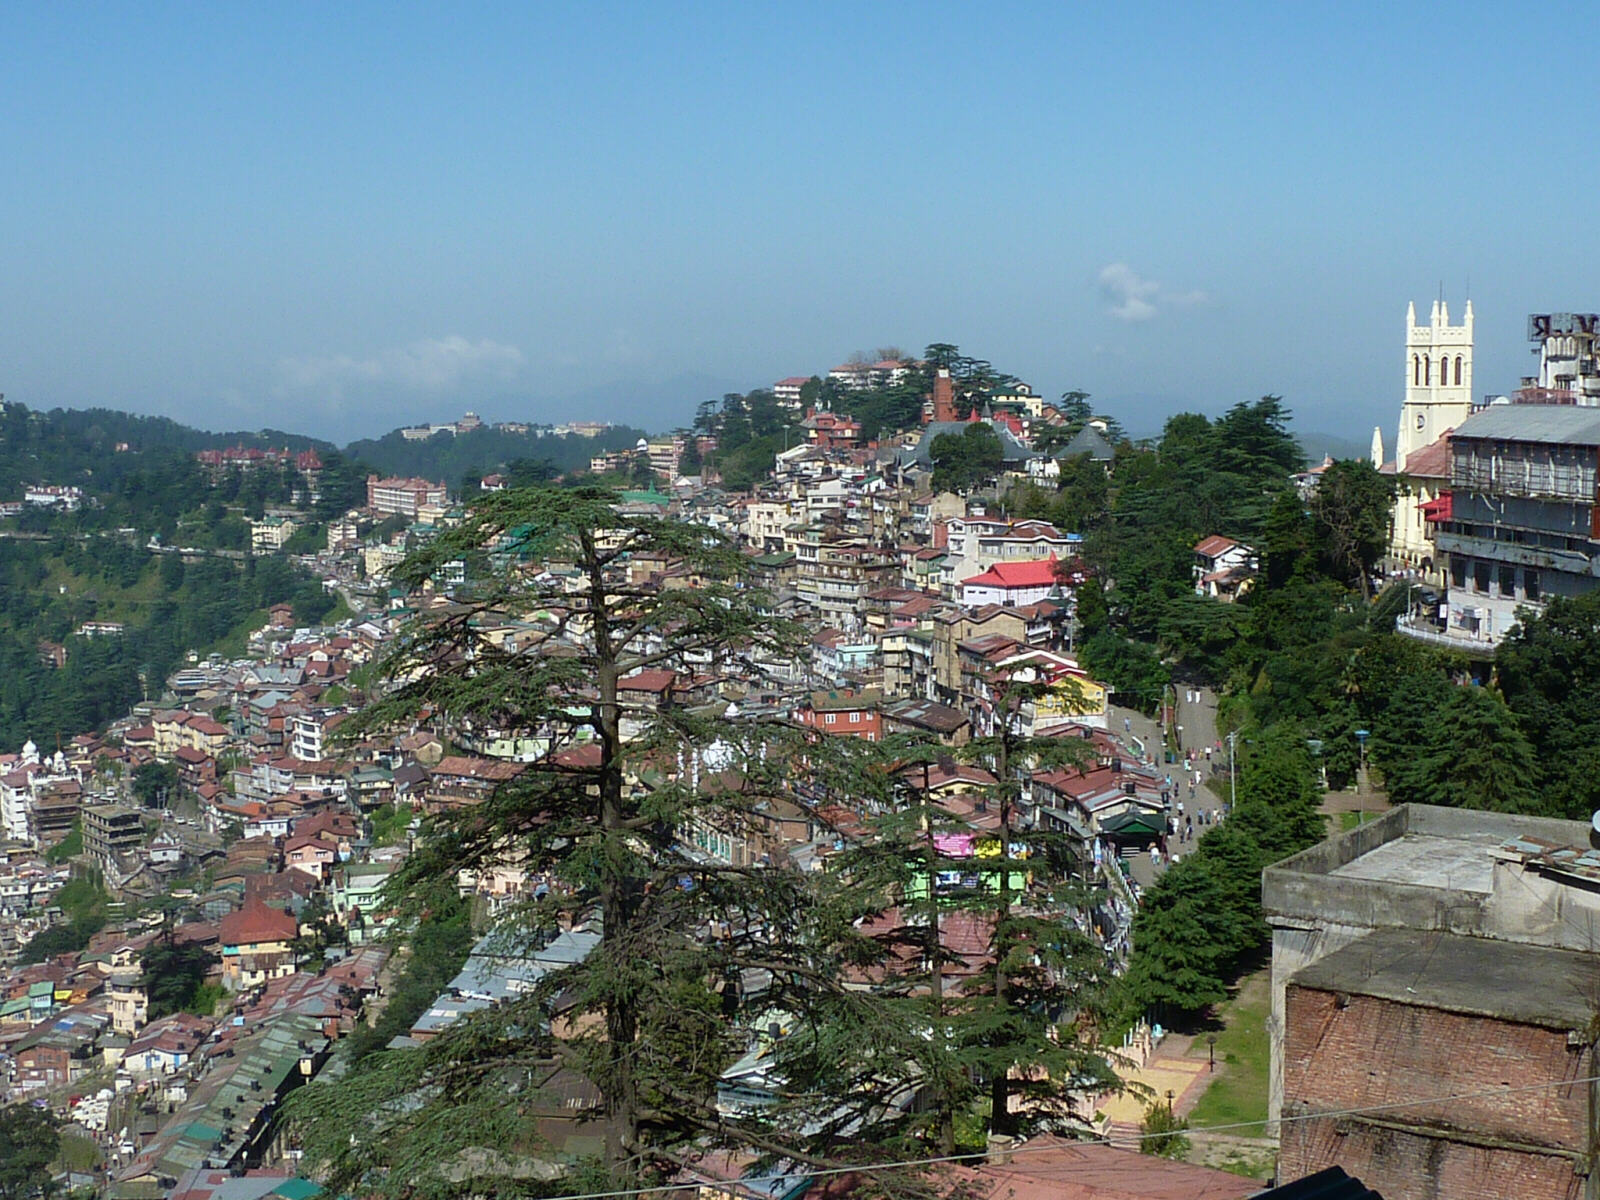 View of Shimla town from Doegar hotel, India